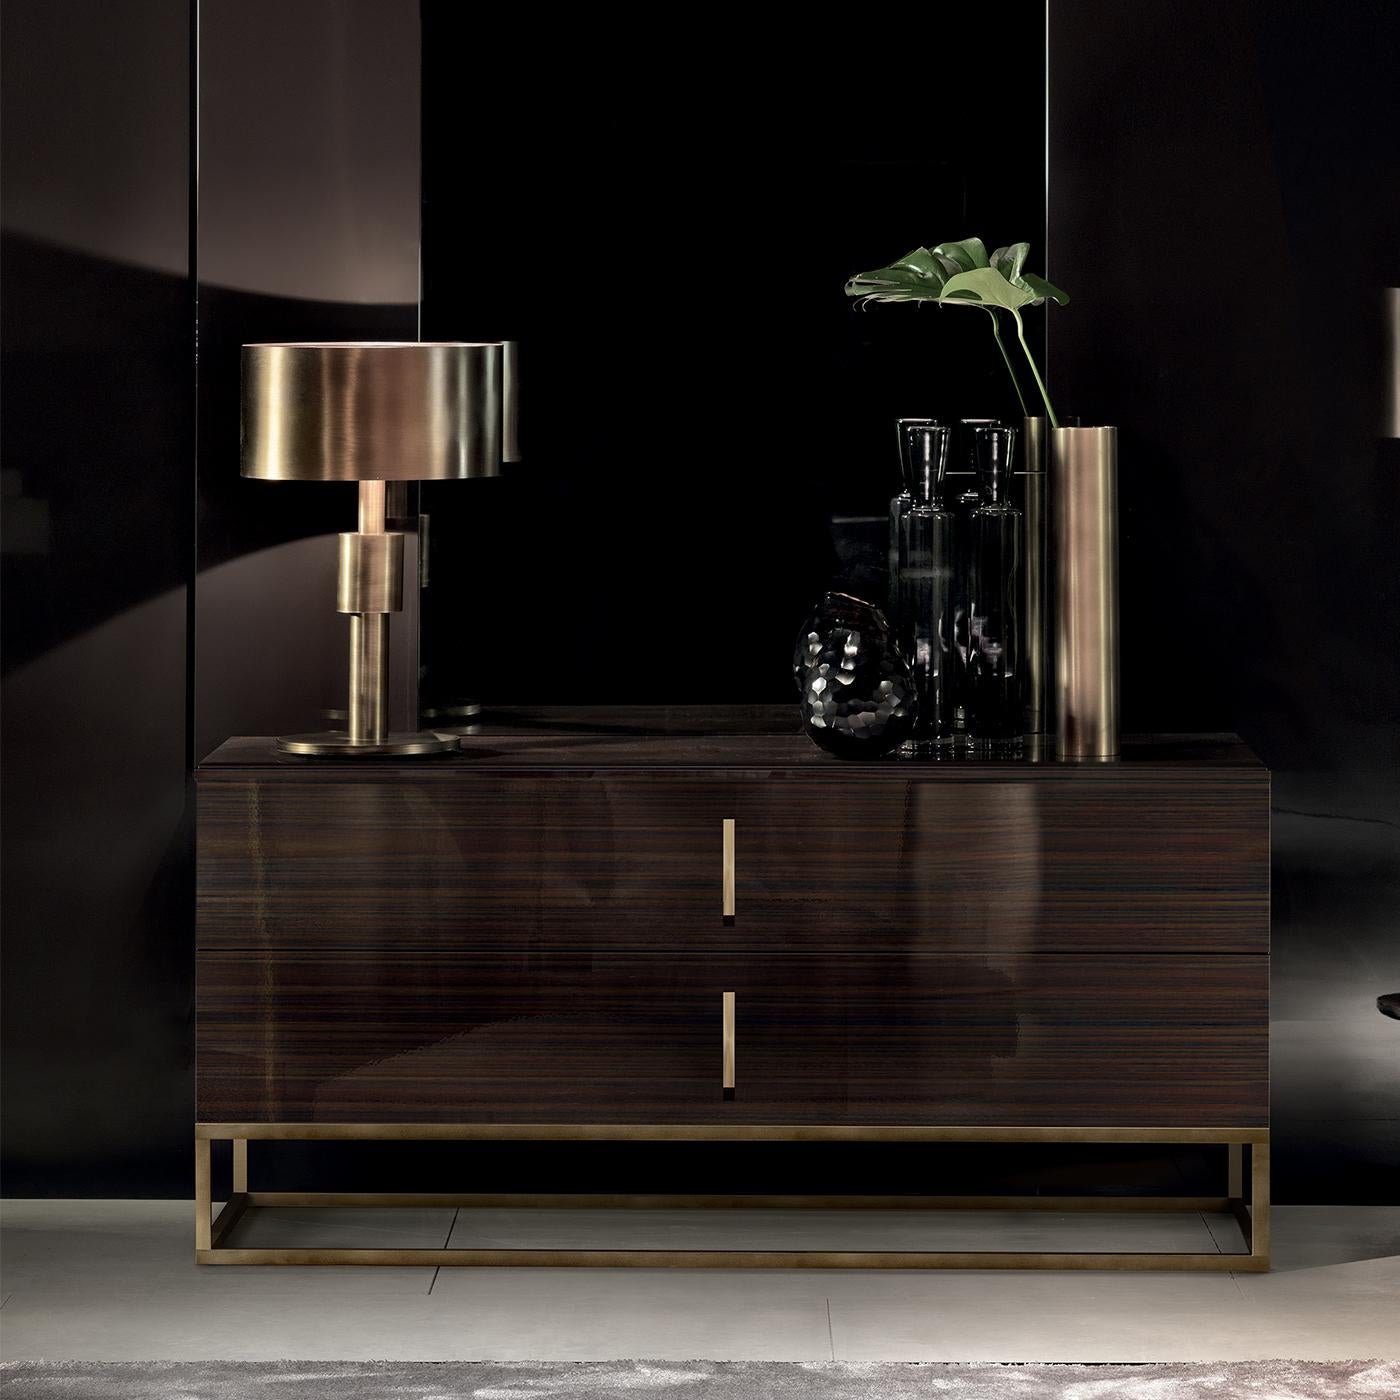 Raised on a burnished brass tubular base, the sleek silhouette and dark hued palette of this remarkable dresser merge style with functionality. Two sliding drawers with burnished brass handles open to reveal a fabric interior. Made of plywood with